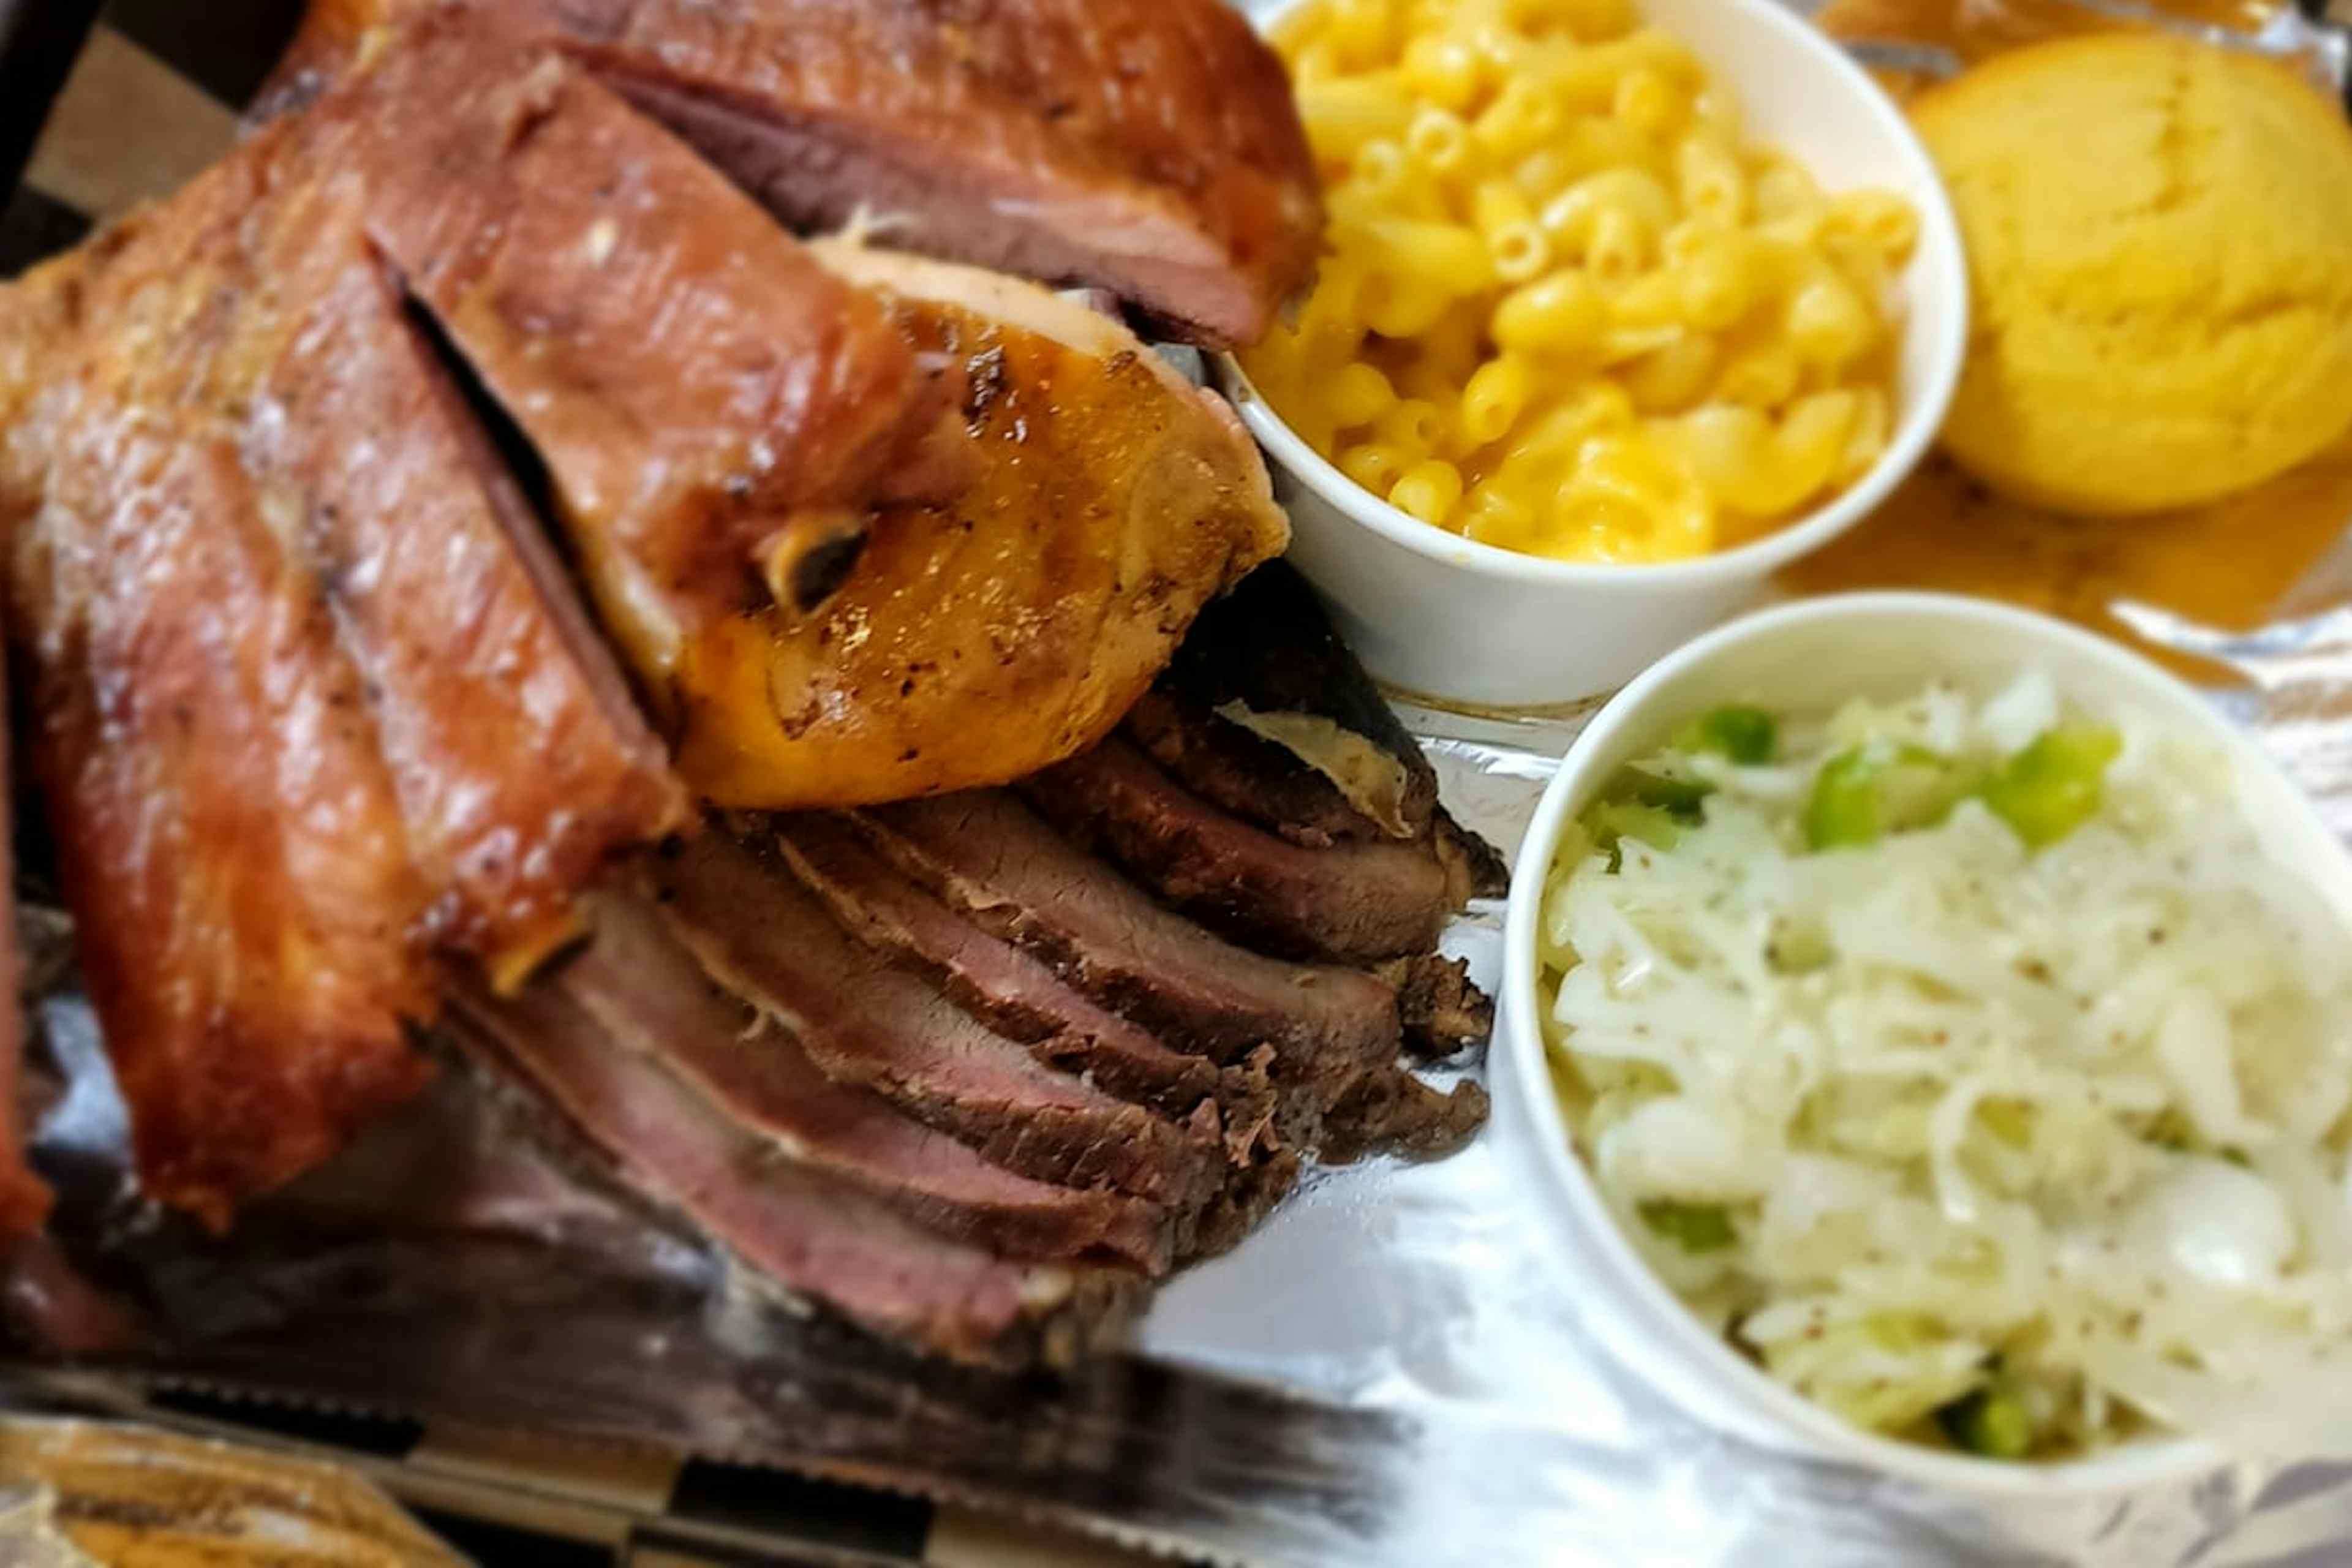 Delicious smoked meats and homemade mac and cheese offered at Grandpa's Southern BBQ in Idaho Falls, Idaho of the Yellowstone Teton Territory